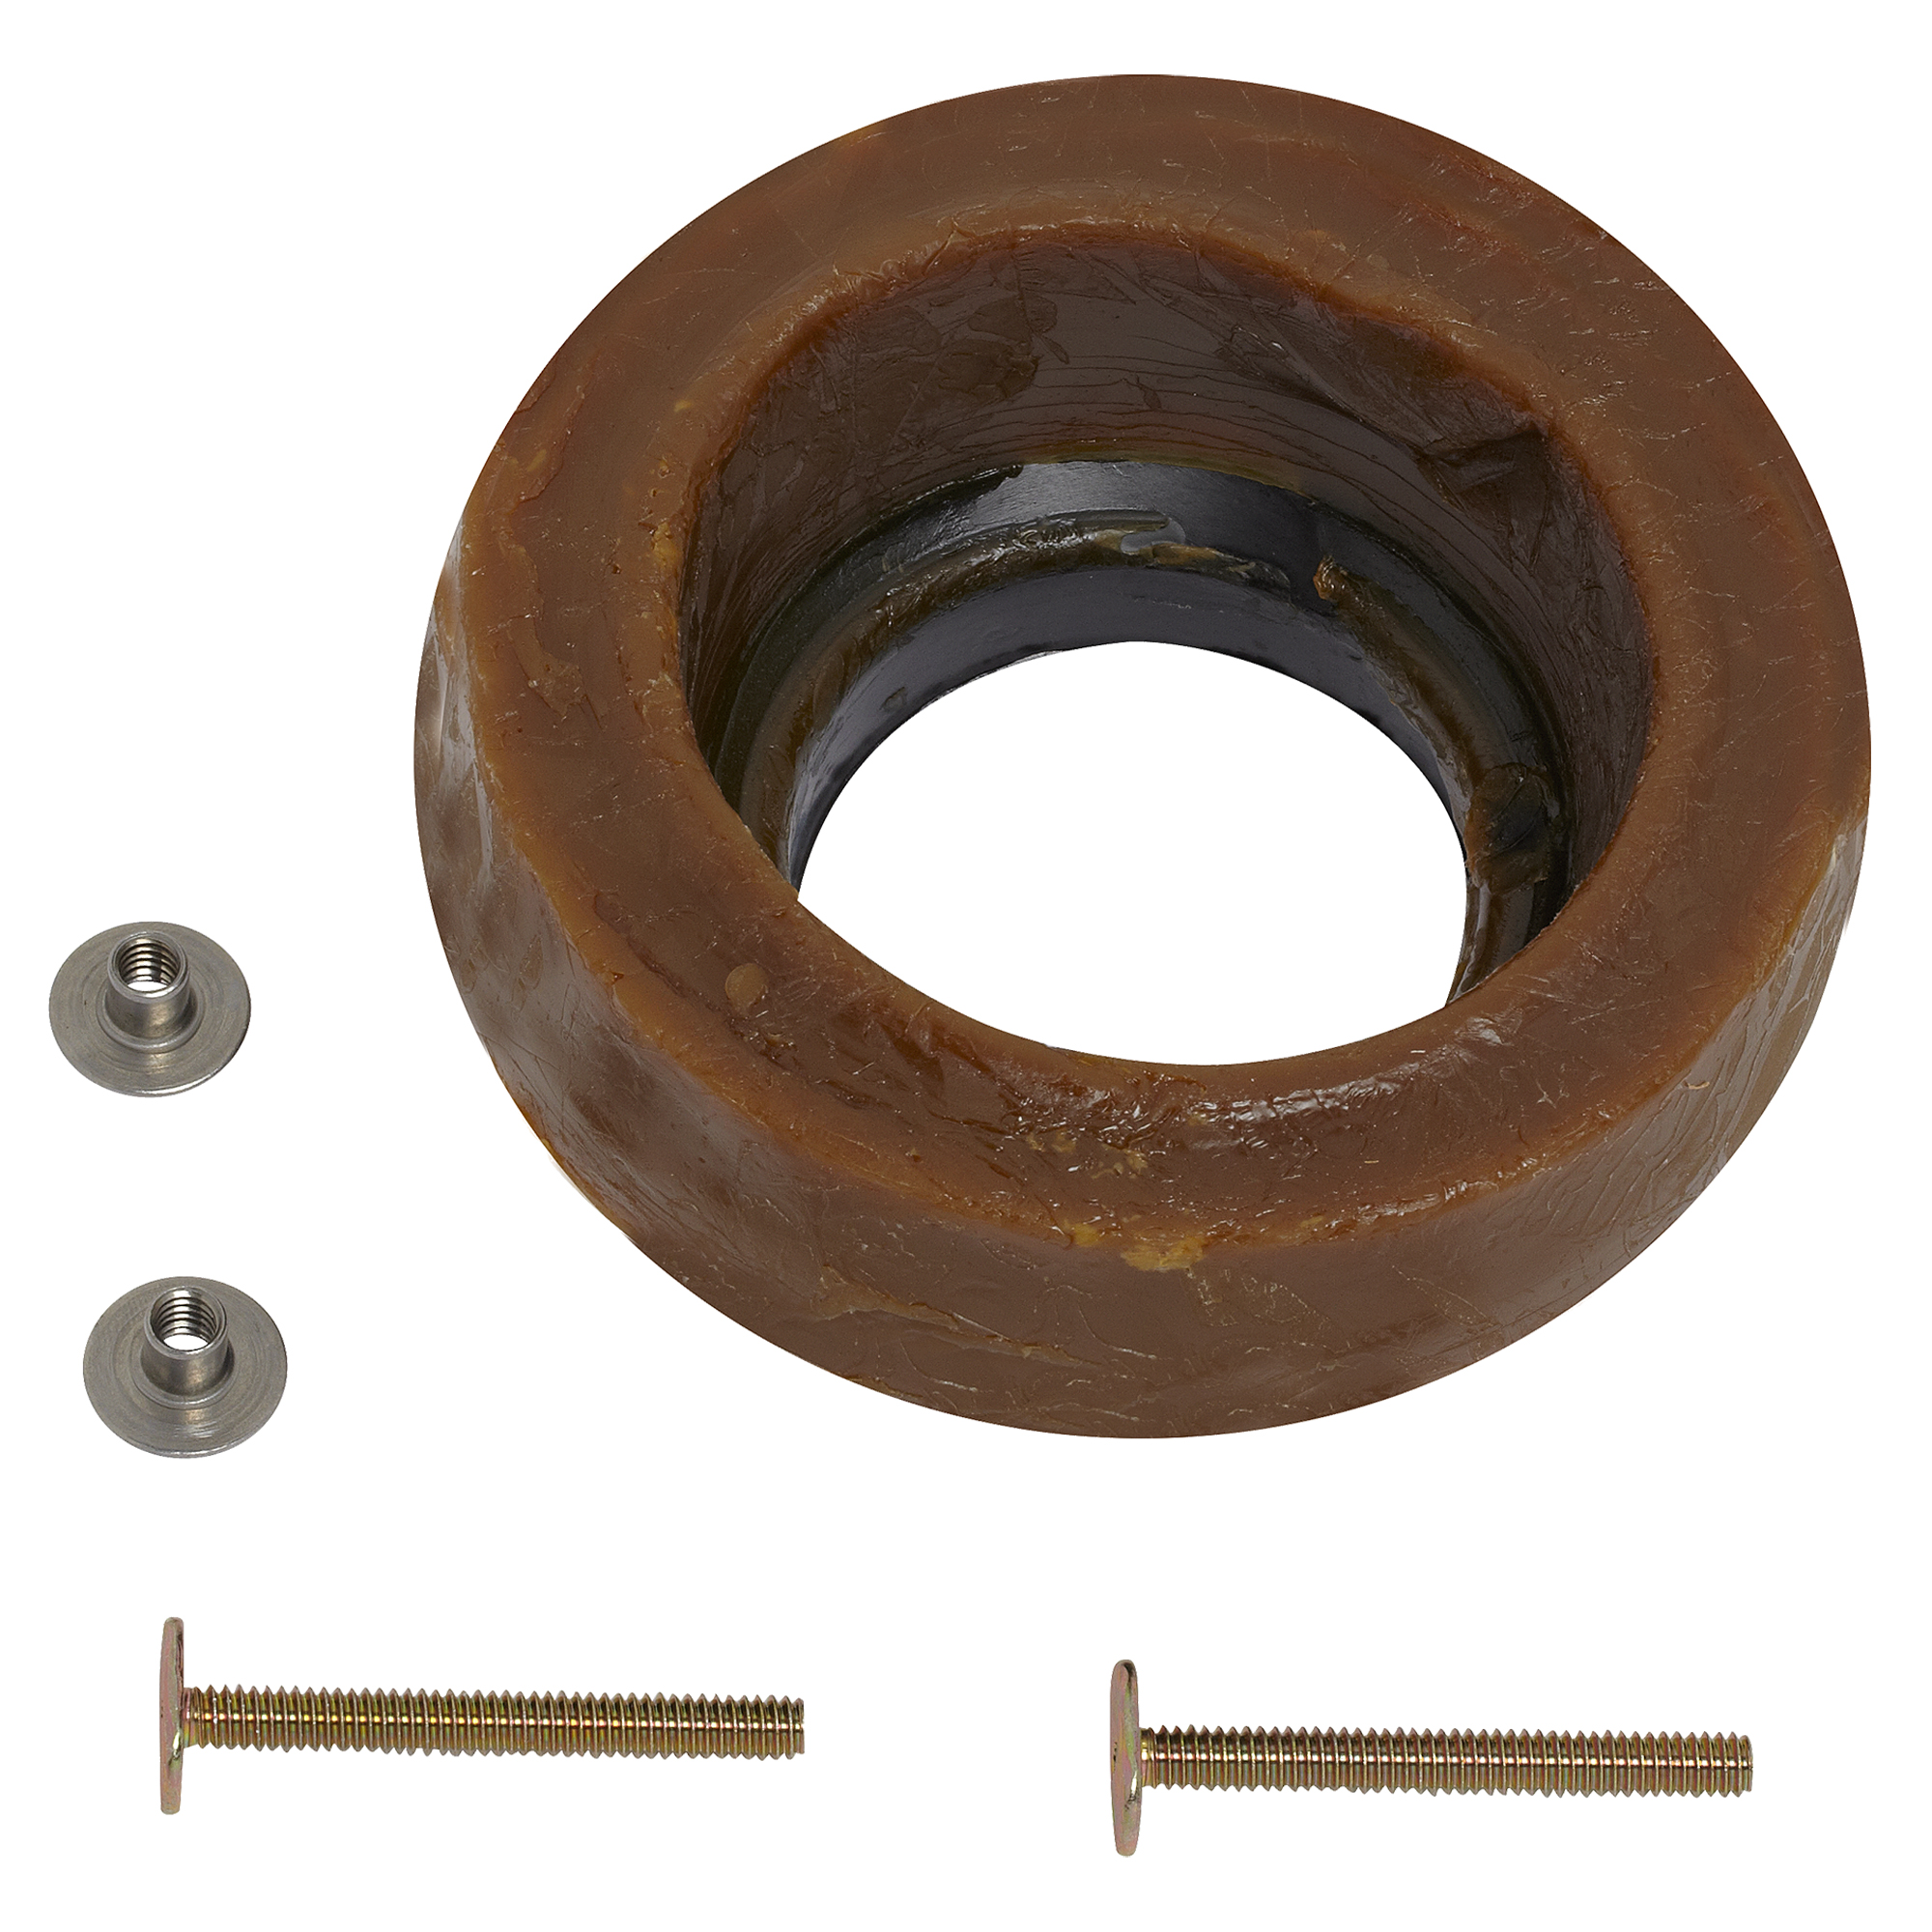 Wax Ring Kit for EZ Install Toilets